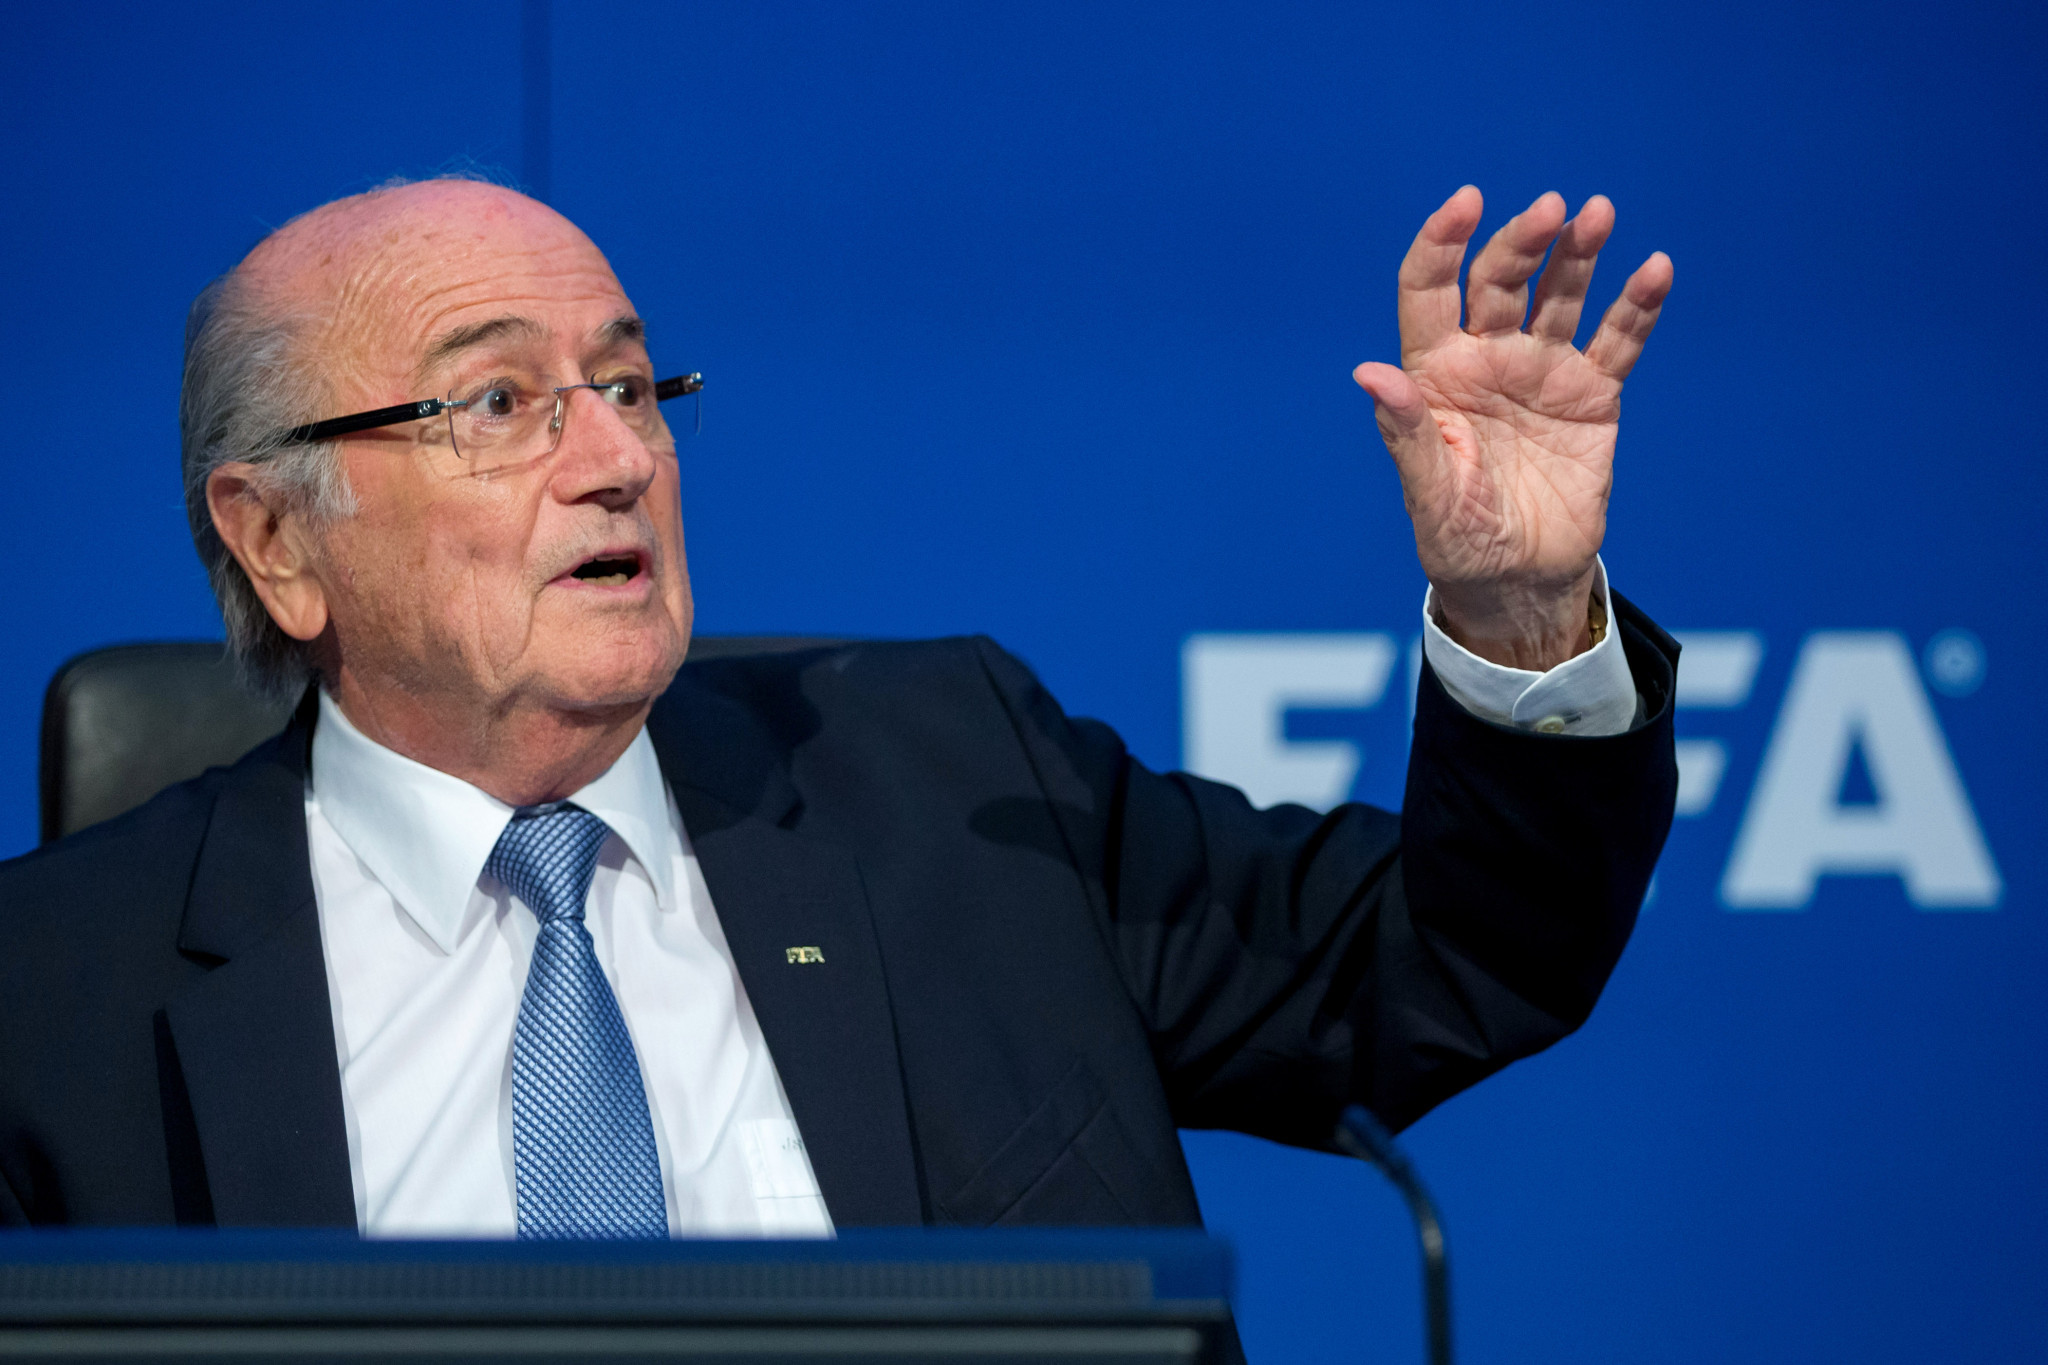 Disgraced former FIFA President Sepp Blatter took the top spot in 2013 ©Getty Images